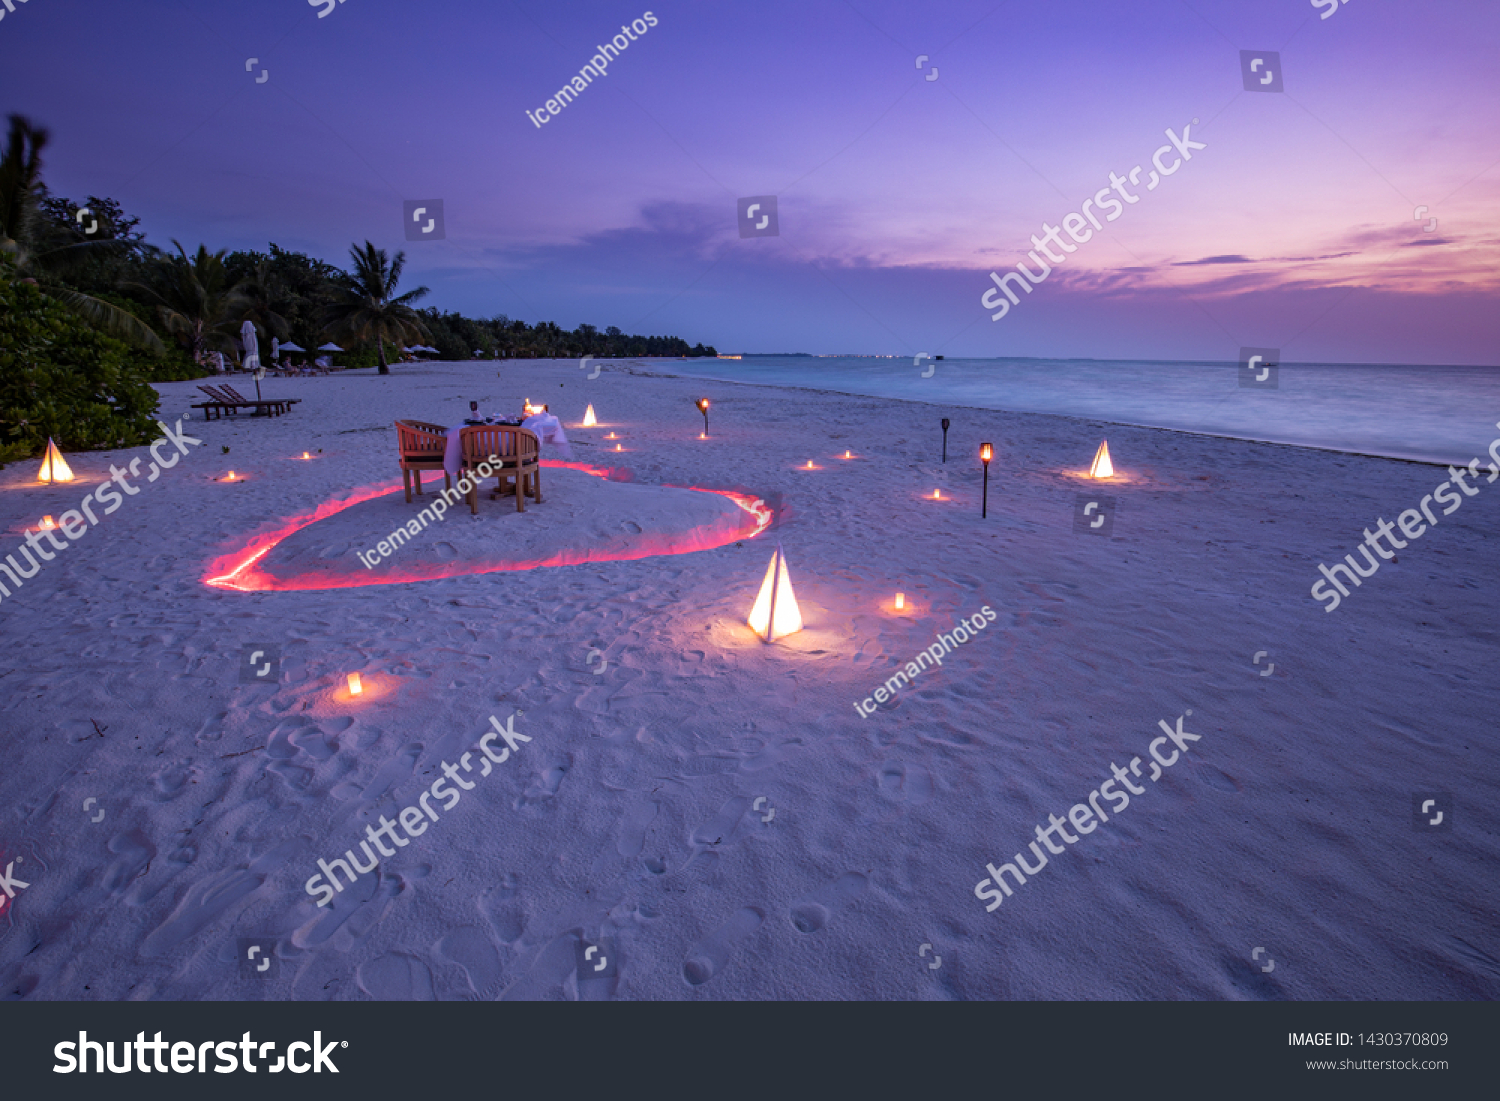 A young couple share a romantic dinner with candles heart shape close the sea sandy beach. Beautiful honeymoon destination, luxury travel, exotic beach dinner at sunset sky with sea background #1430370809